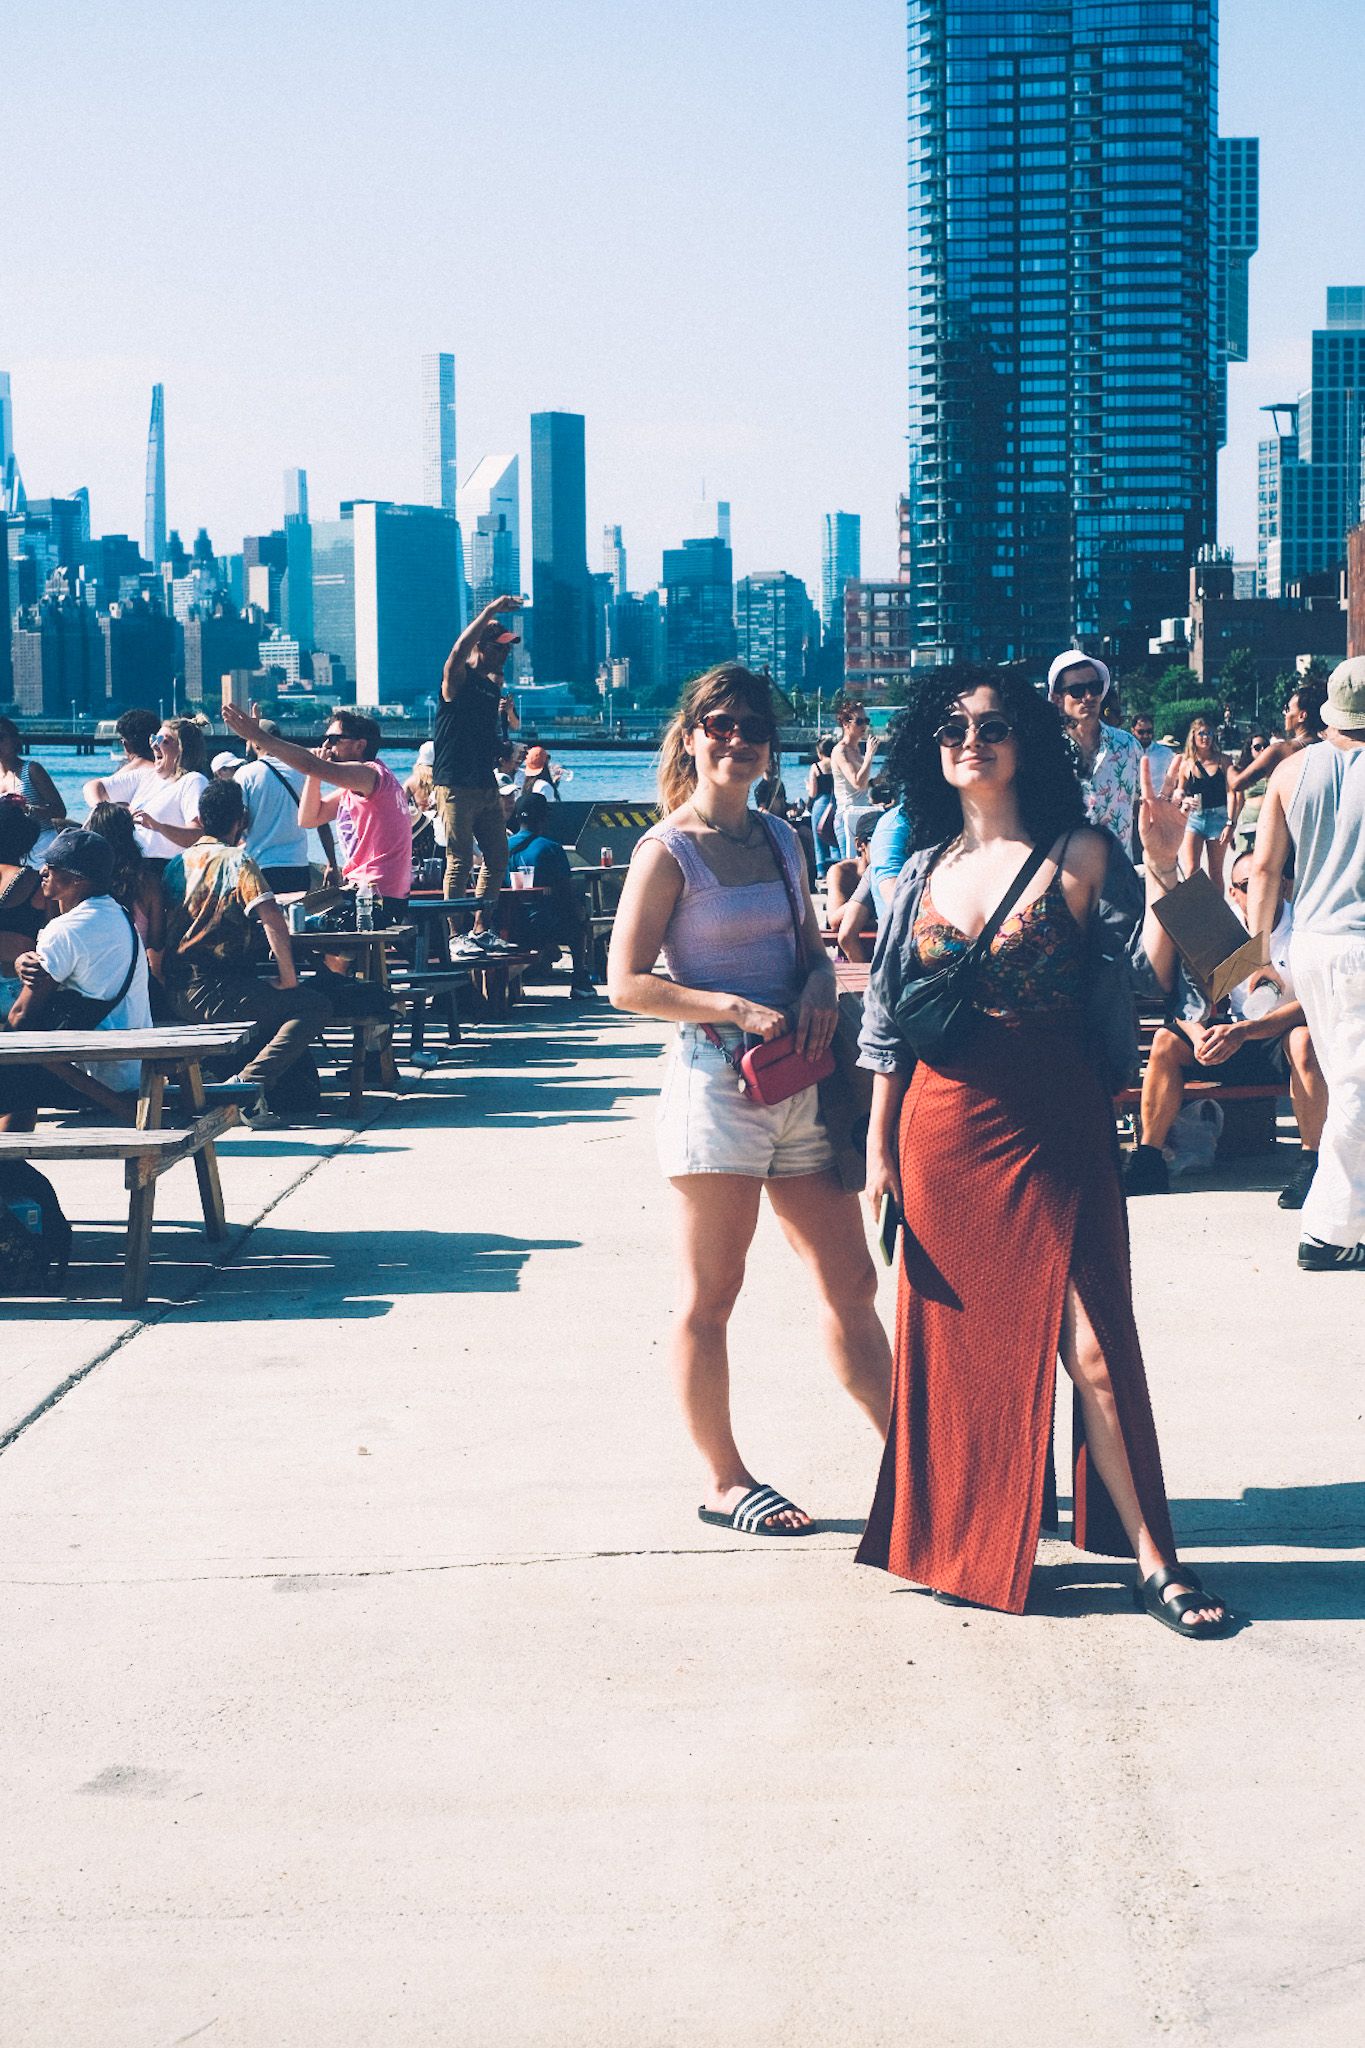 Two women stand on a sunny pier in front of a city skyline, people dancing and sitting on picnic tables in the background.